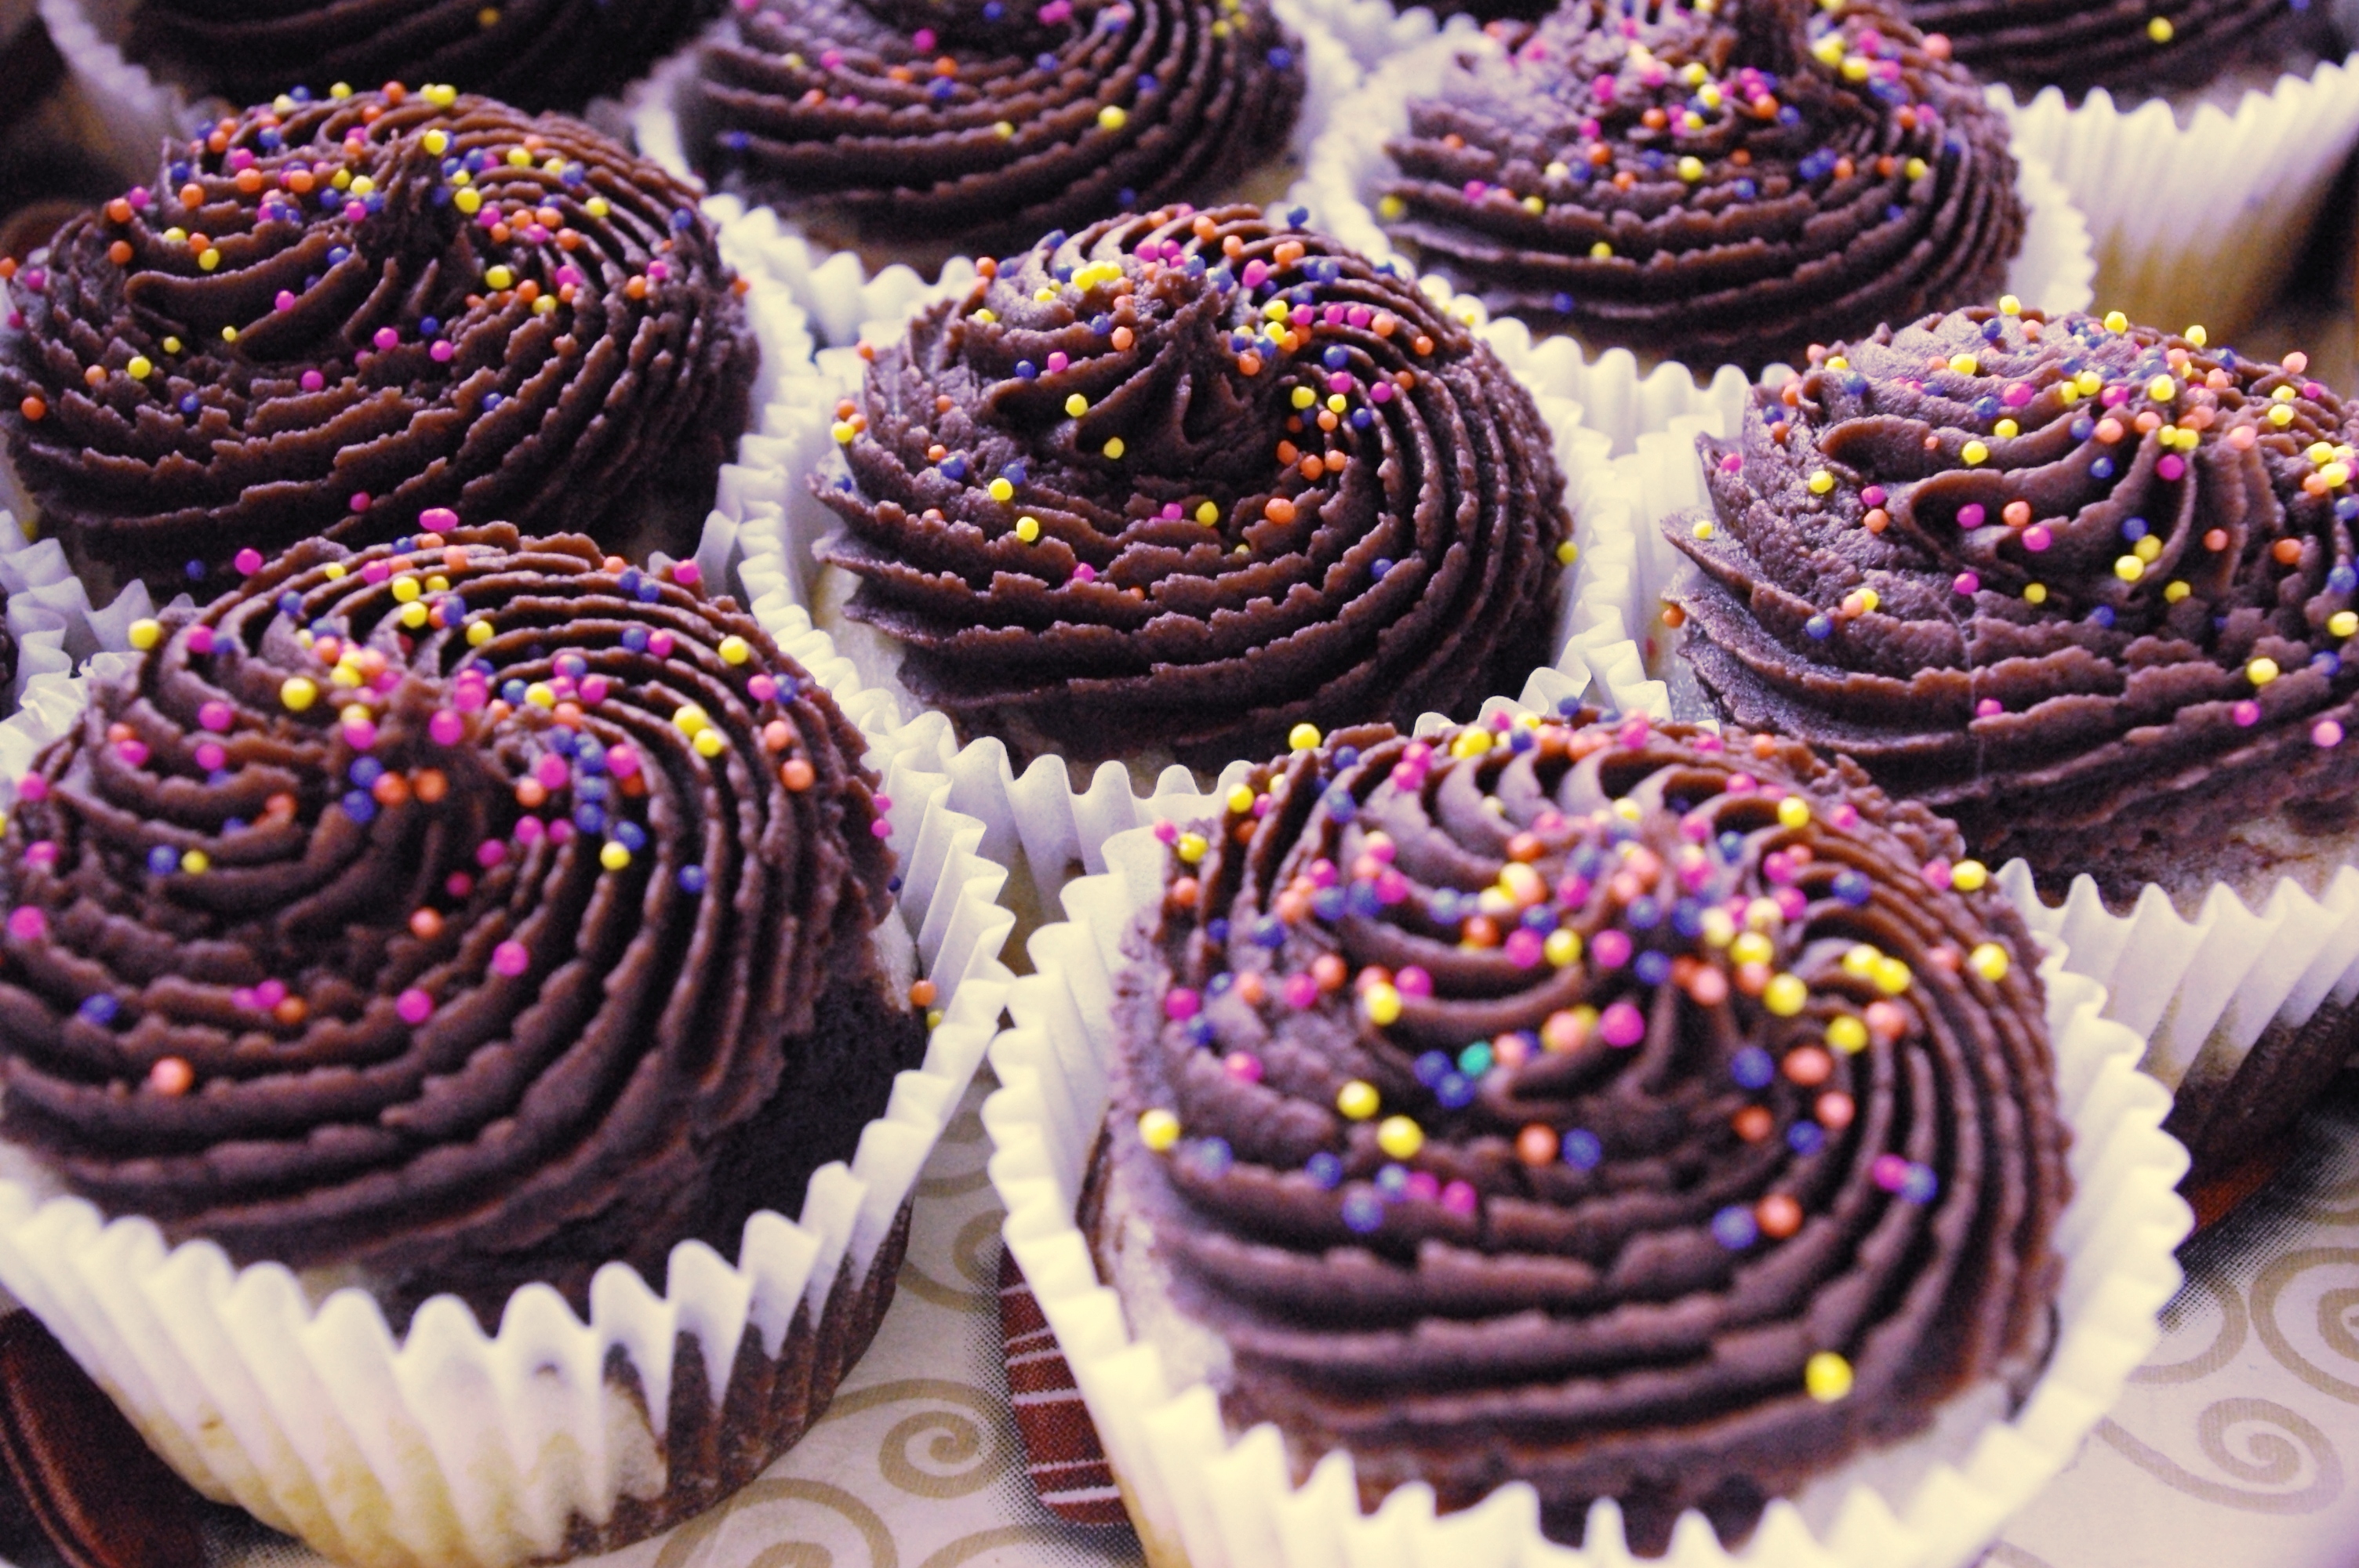 Purple Cupcakes with Chocolate Frosting